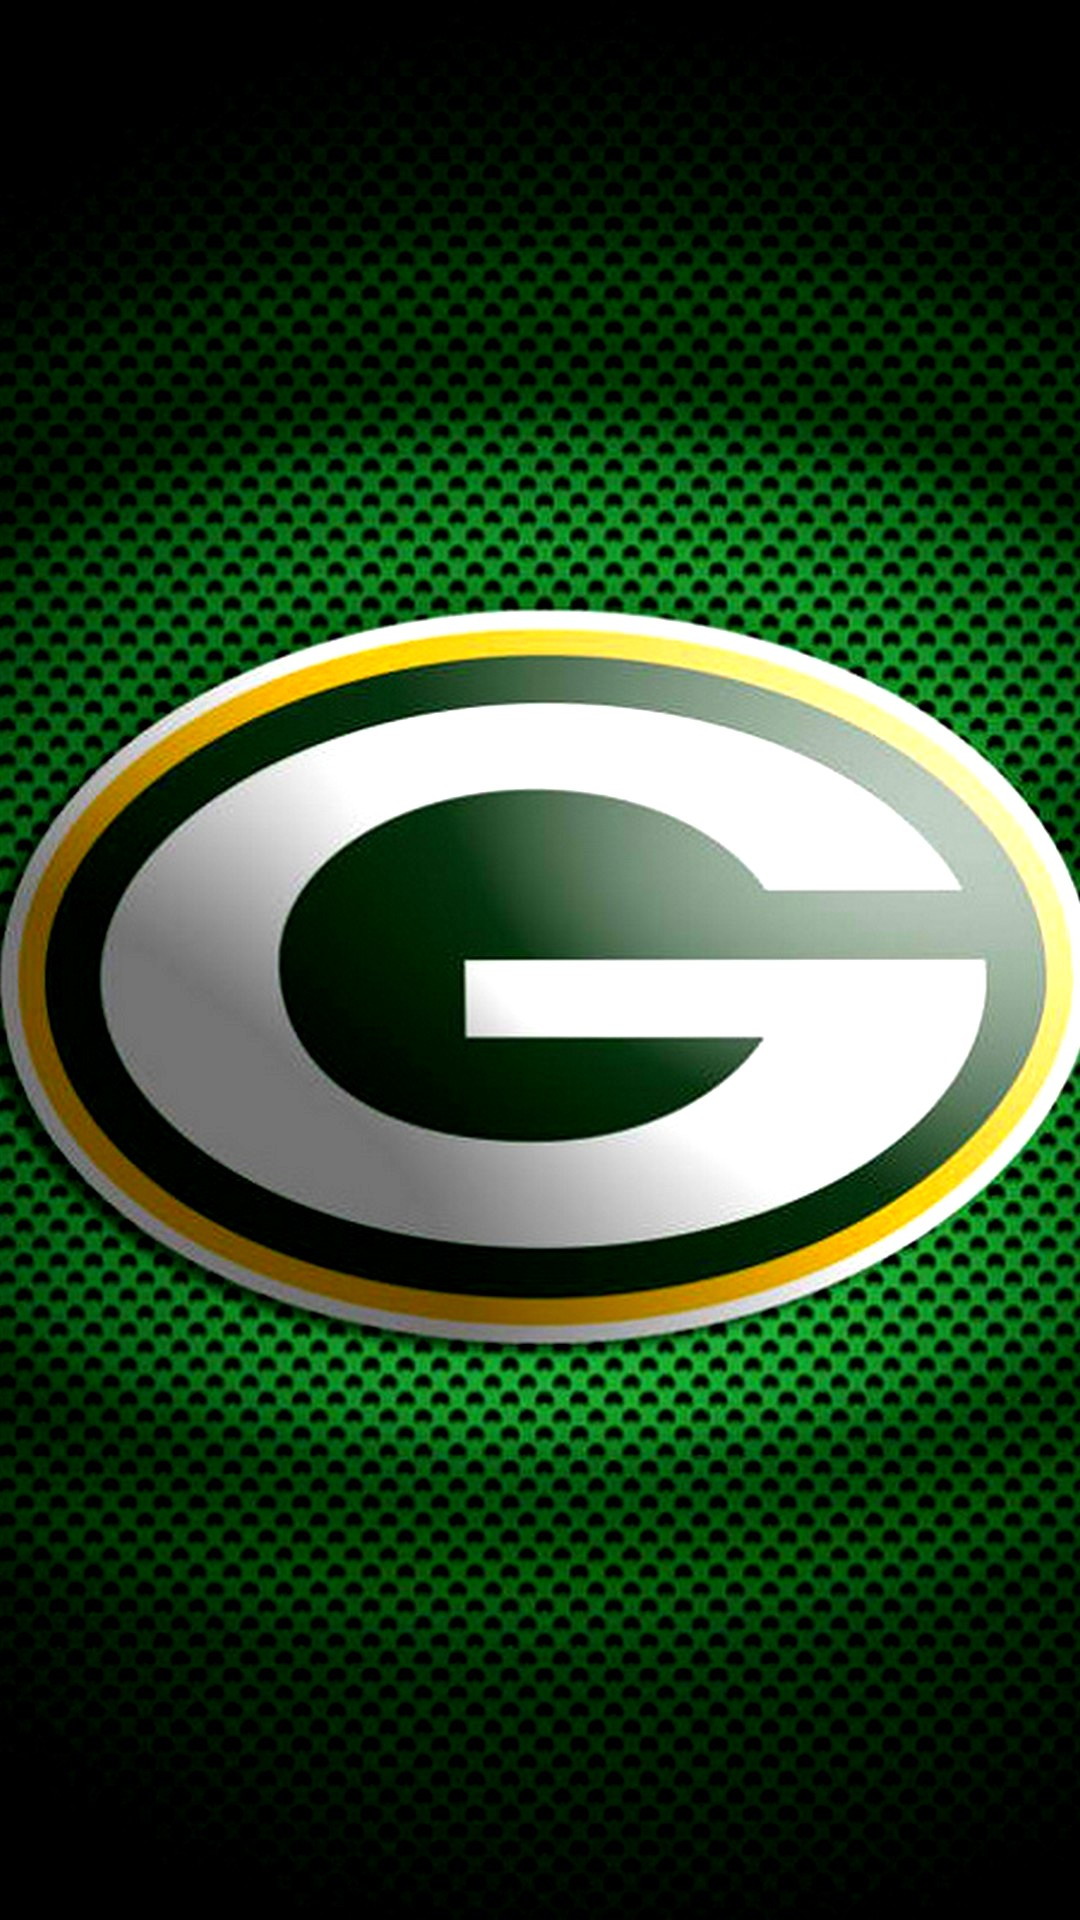 Green Bay Packers Cell Phone Wallpaper with high-resolution 1080x1920 pixel. You can use and set as wallpaper for Notebook Screensavers, Mac Wallpapers, Mobile Home Screen, iPhone or Android Phones Lock Screen